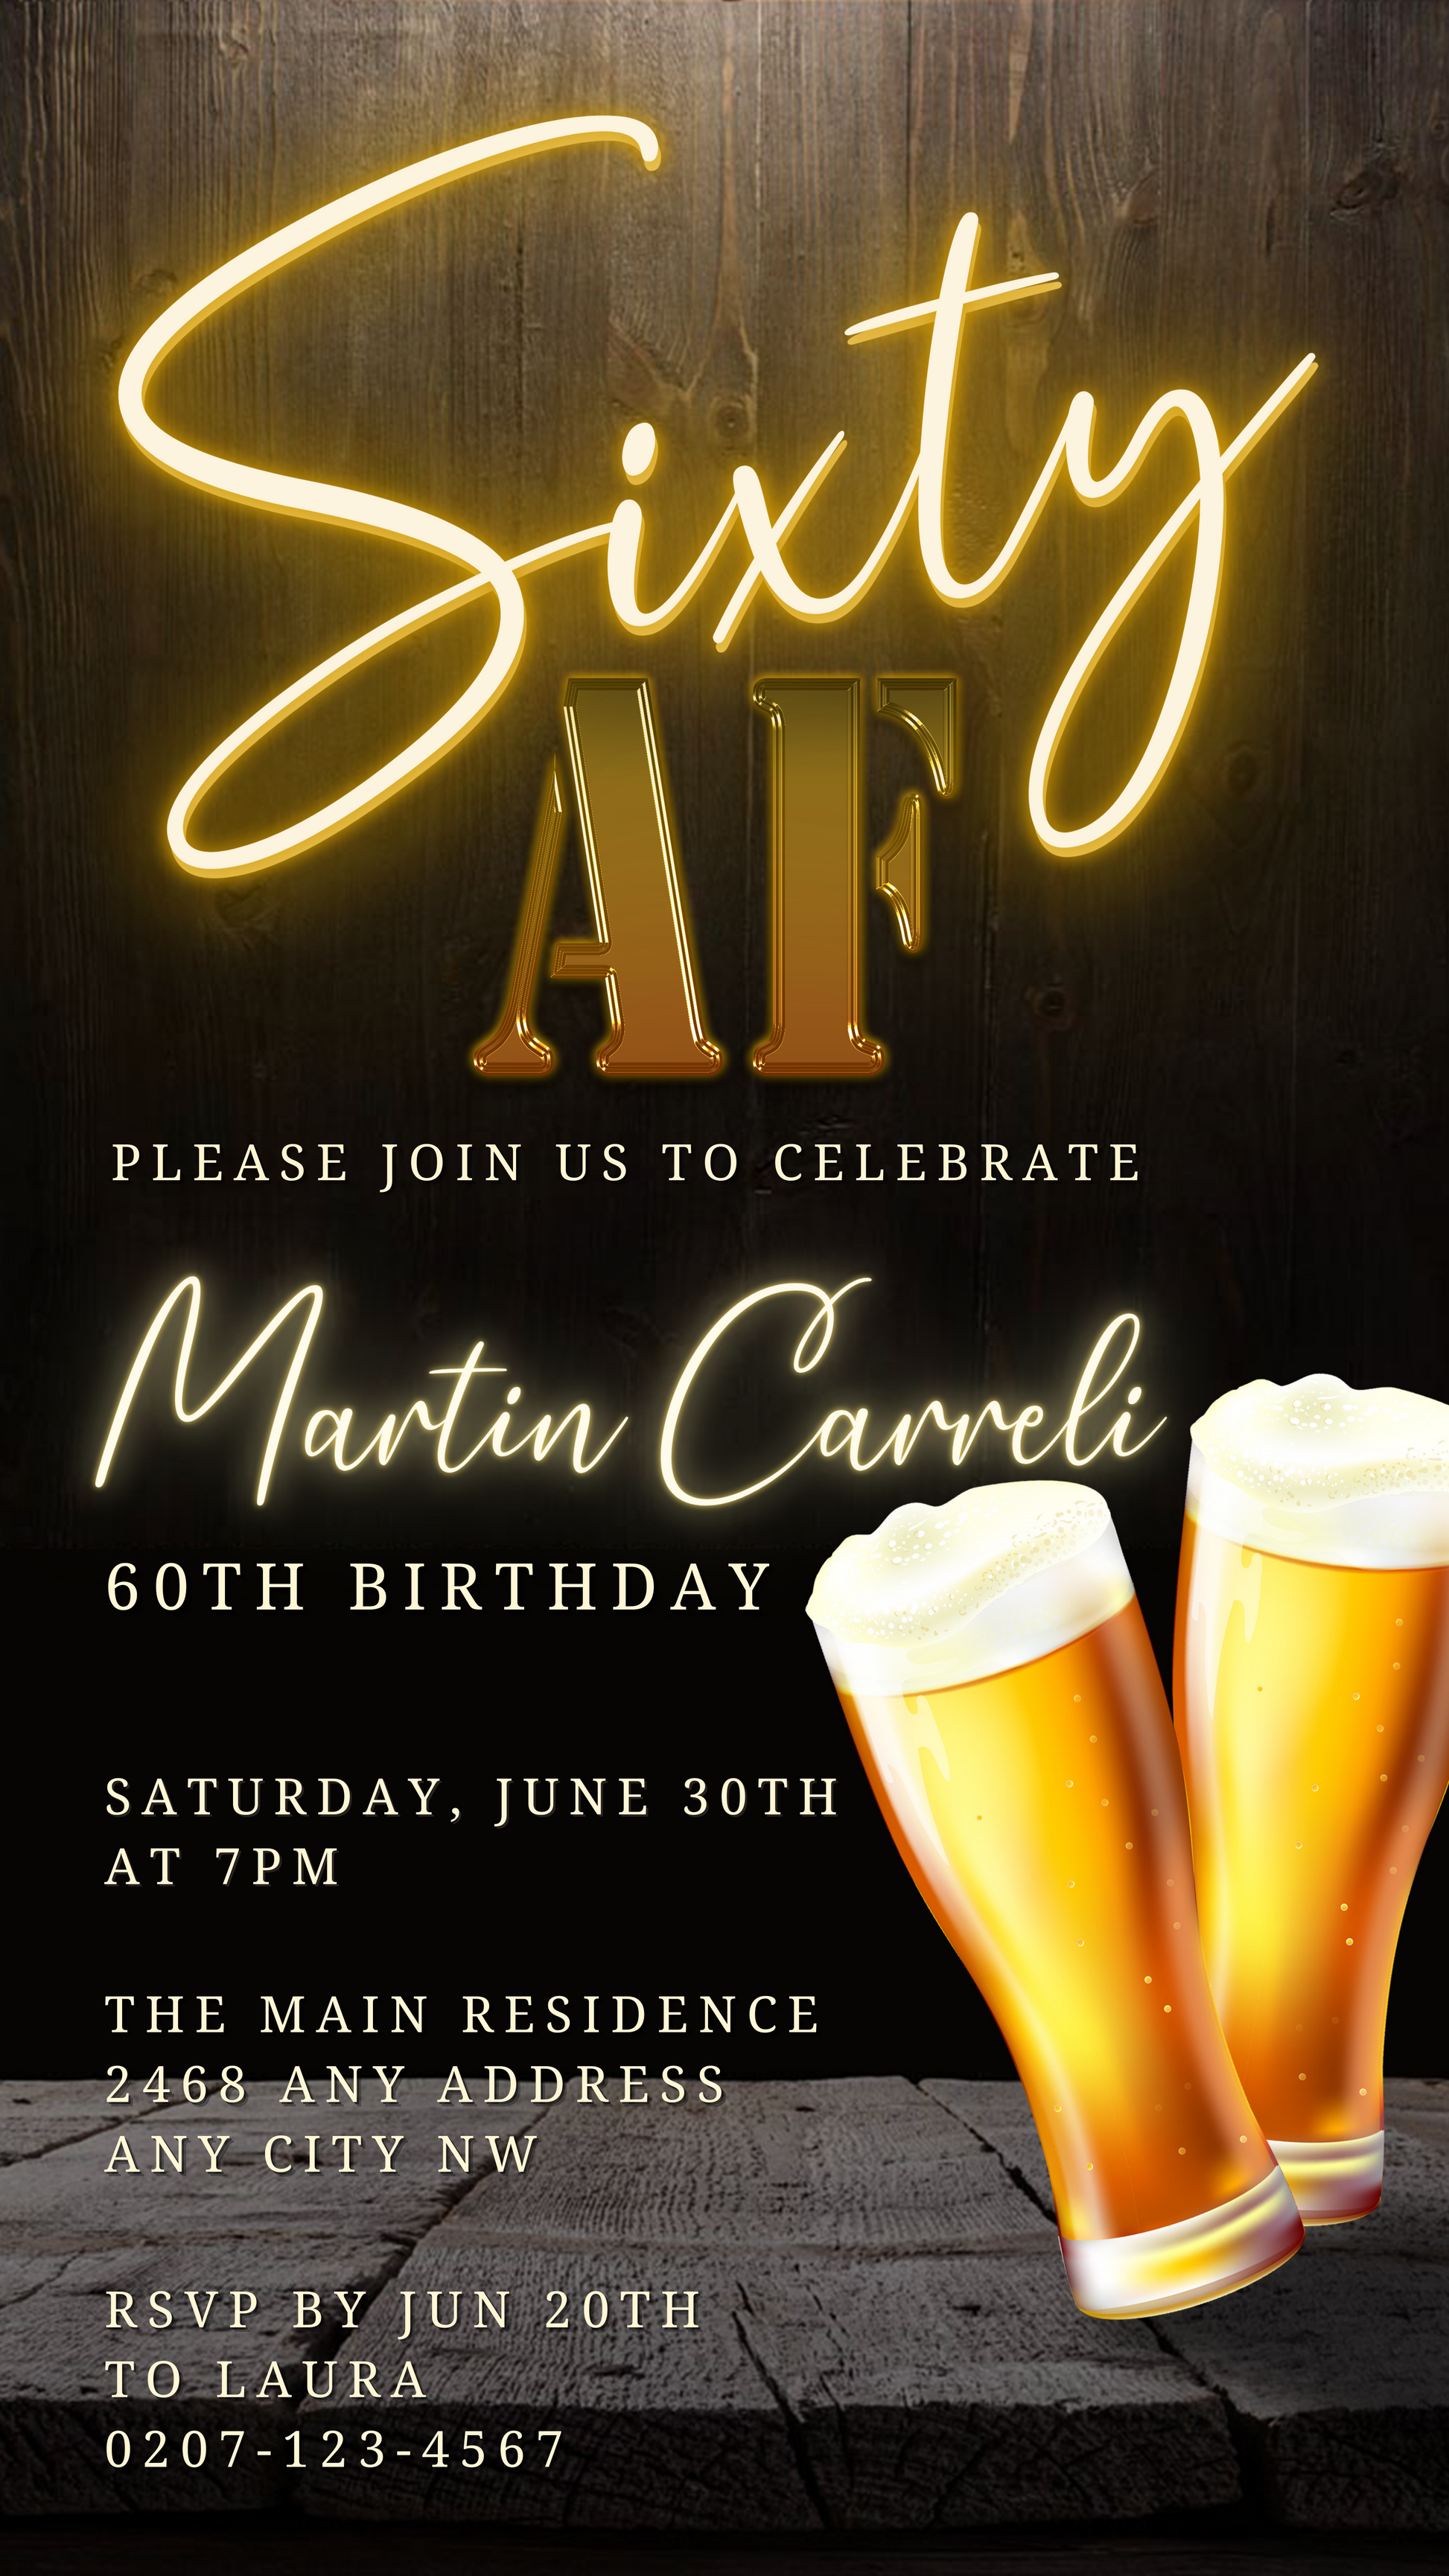 Digital Black Gold Neon Beer | 60AF Birthday Evite showcasing beer glasses and customizable invitation text for birthday parties.